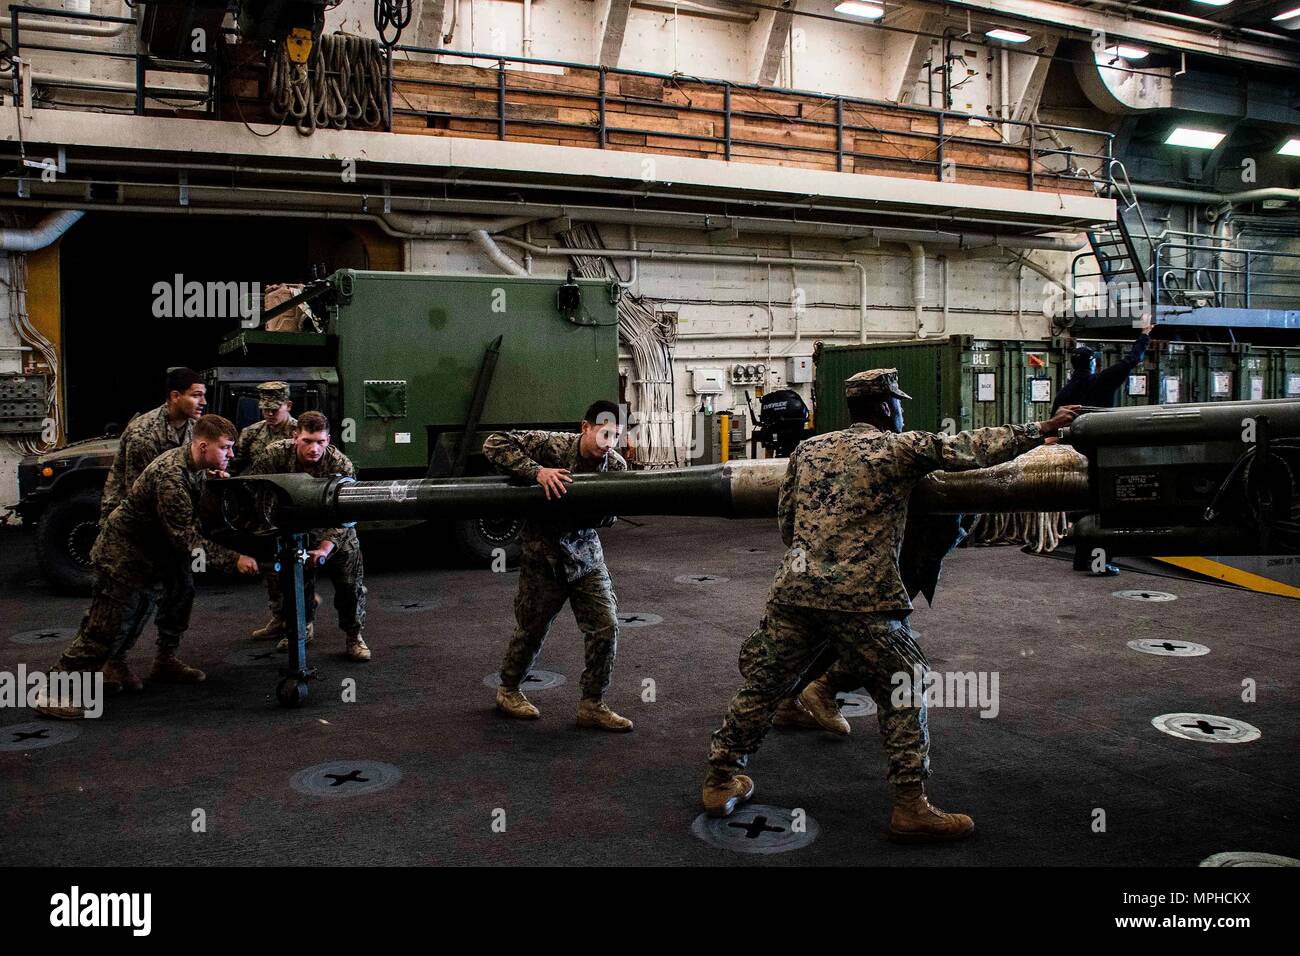 170314-N-JH293-235 OKINAWA, Japan (March 14, 2017) Marines assigned to the 31st Marine Expeditionary Unit (MEU) push an M777 Howitzer through the vehicle storage area of the amphibious transport dock ship USS Green Bay (LPD 20). Green Bay, part of the Bonhomme Richard Expeditionary Strike Group, with embarked 31st MEU, is on a routine patrol, operating in the Indo-Asia-Pacific region to enhance warfighting readiness and posture forward as a ready-response force for any type of contingency. (U.S. Navy photo by Mass Communication Specialist 1st Class Chris Williamson/Released) Stock Photo